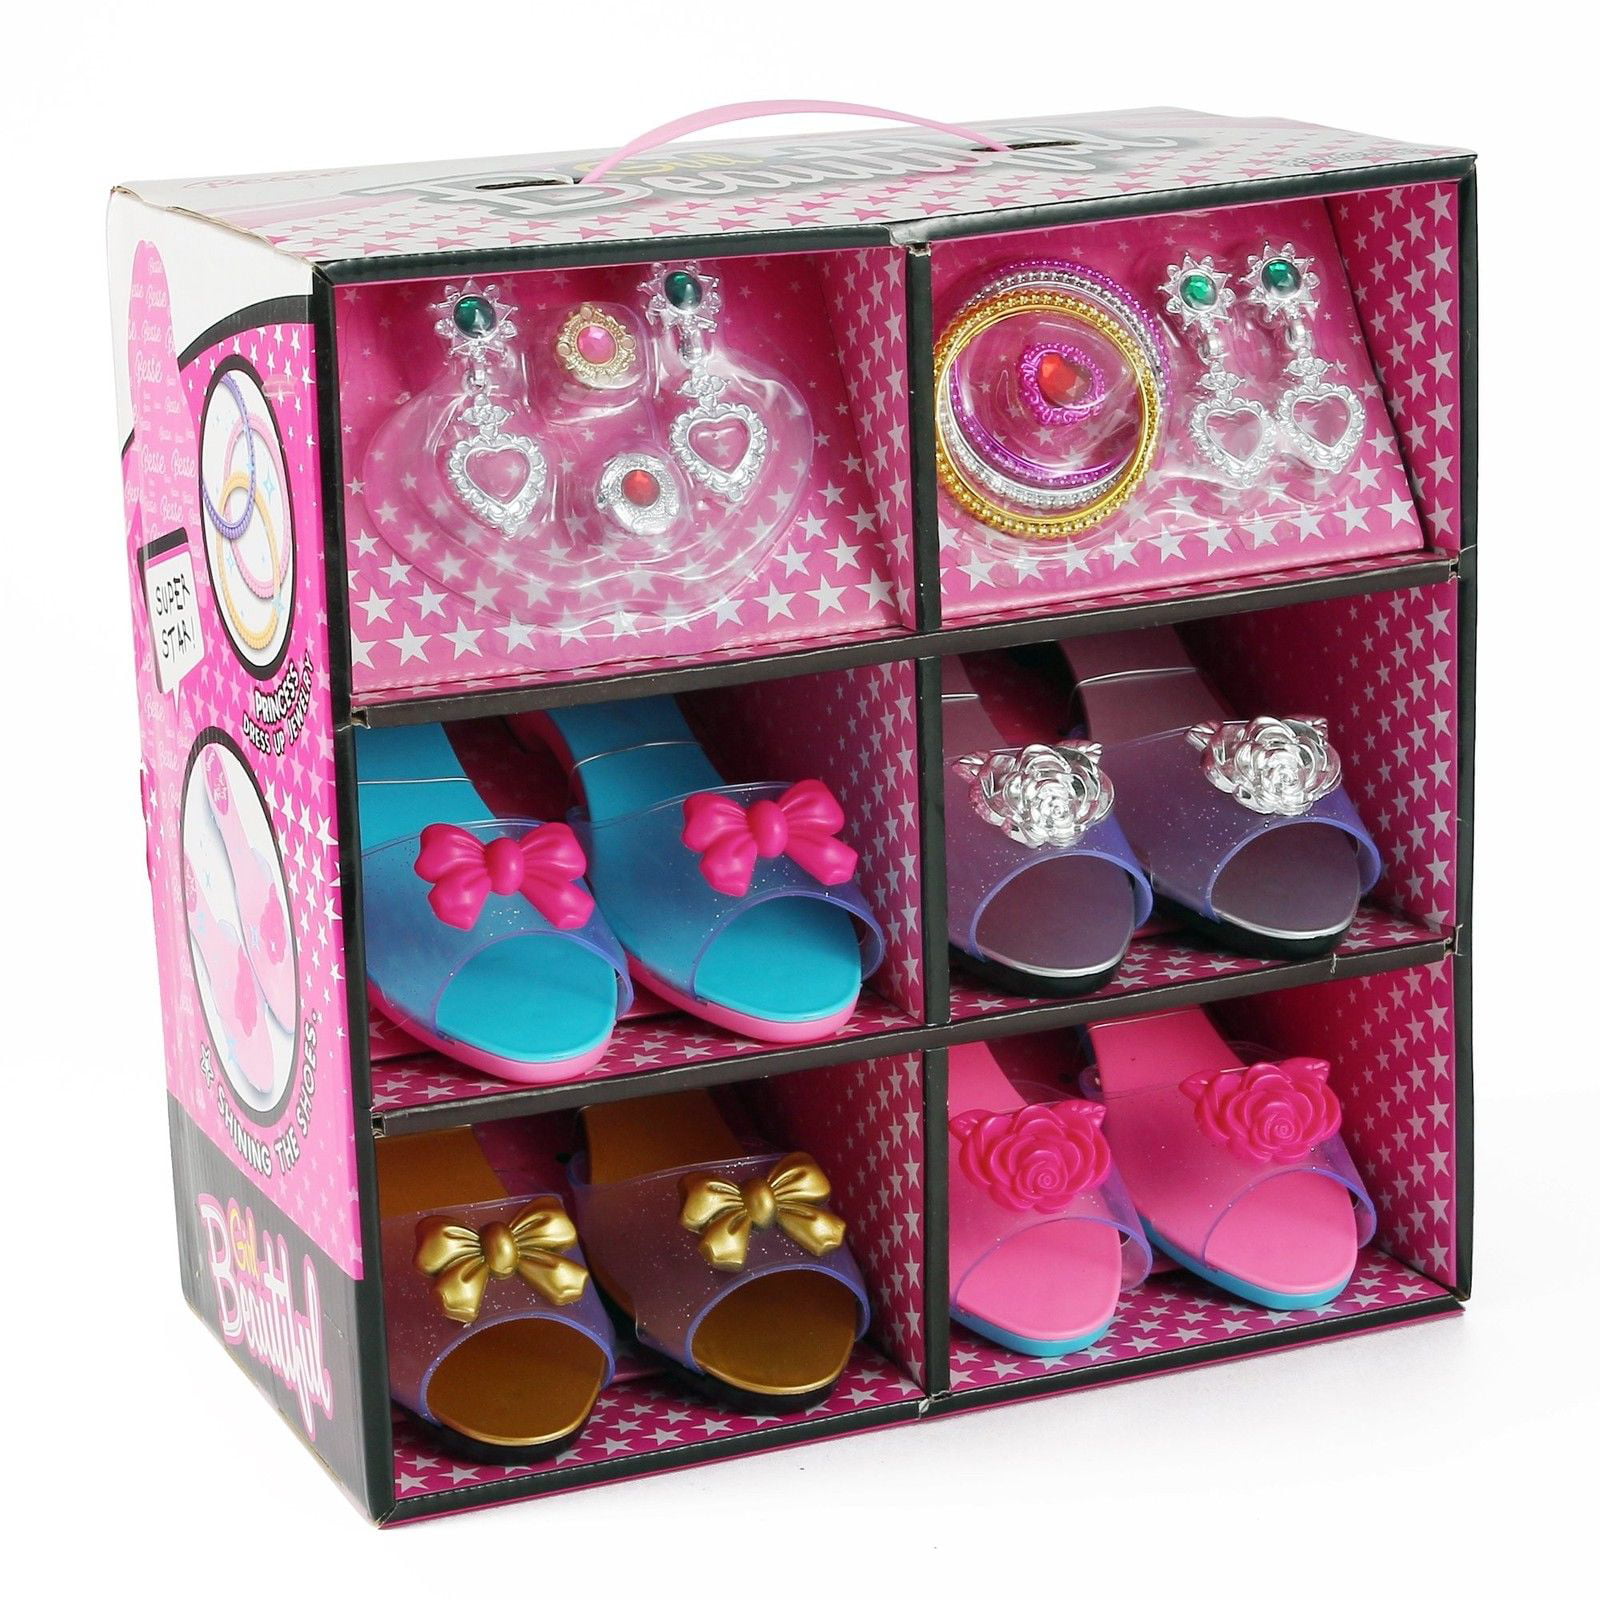 Toyvelt Princess Dress Up & Play Shoe And Jewelry Boutique Includes 4 